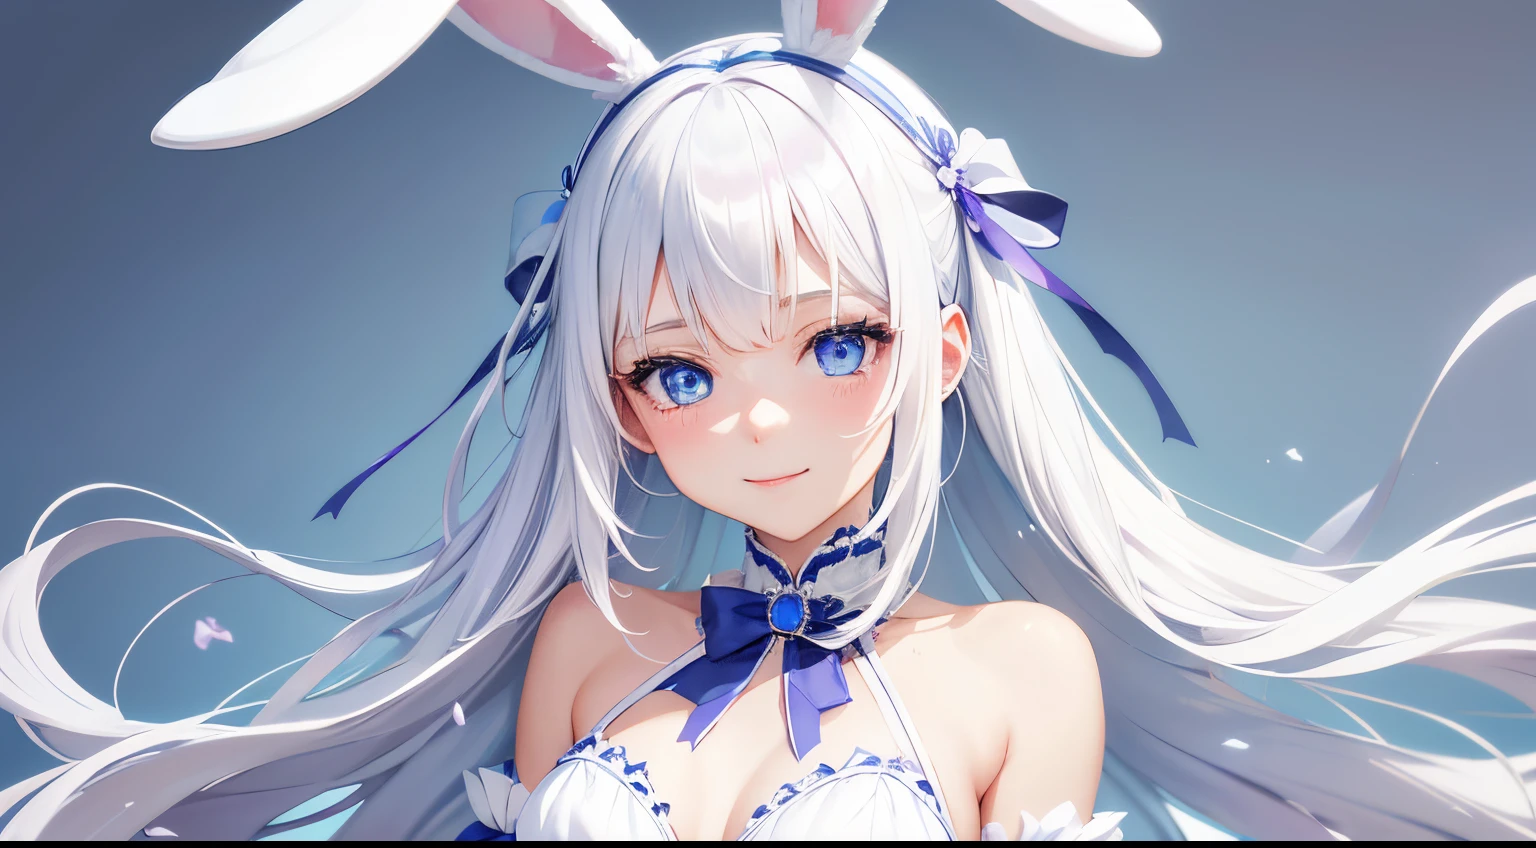 best quality, details, light blue eyes!, make cute white hair 22years old girl smiling with white bunny ears band, straight hair, sfw small breasts, soft violet background